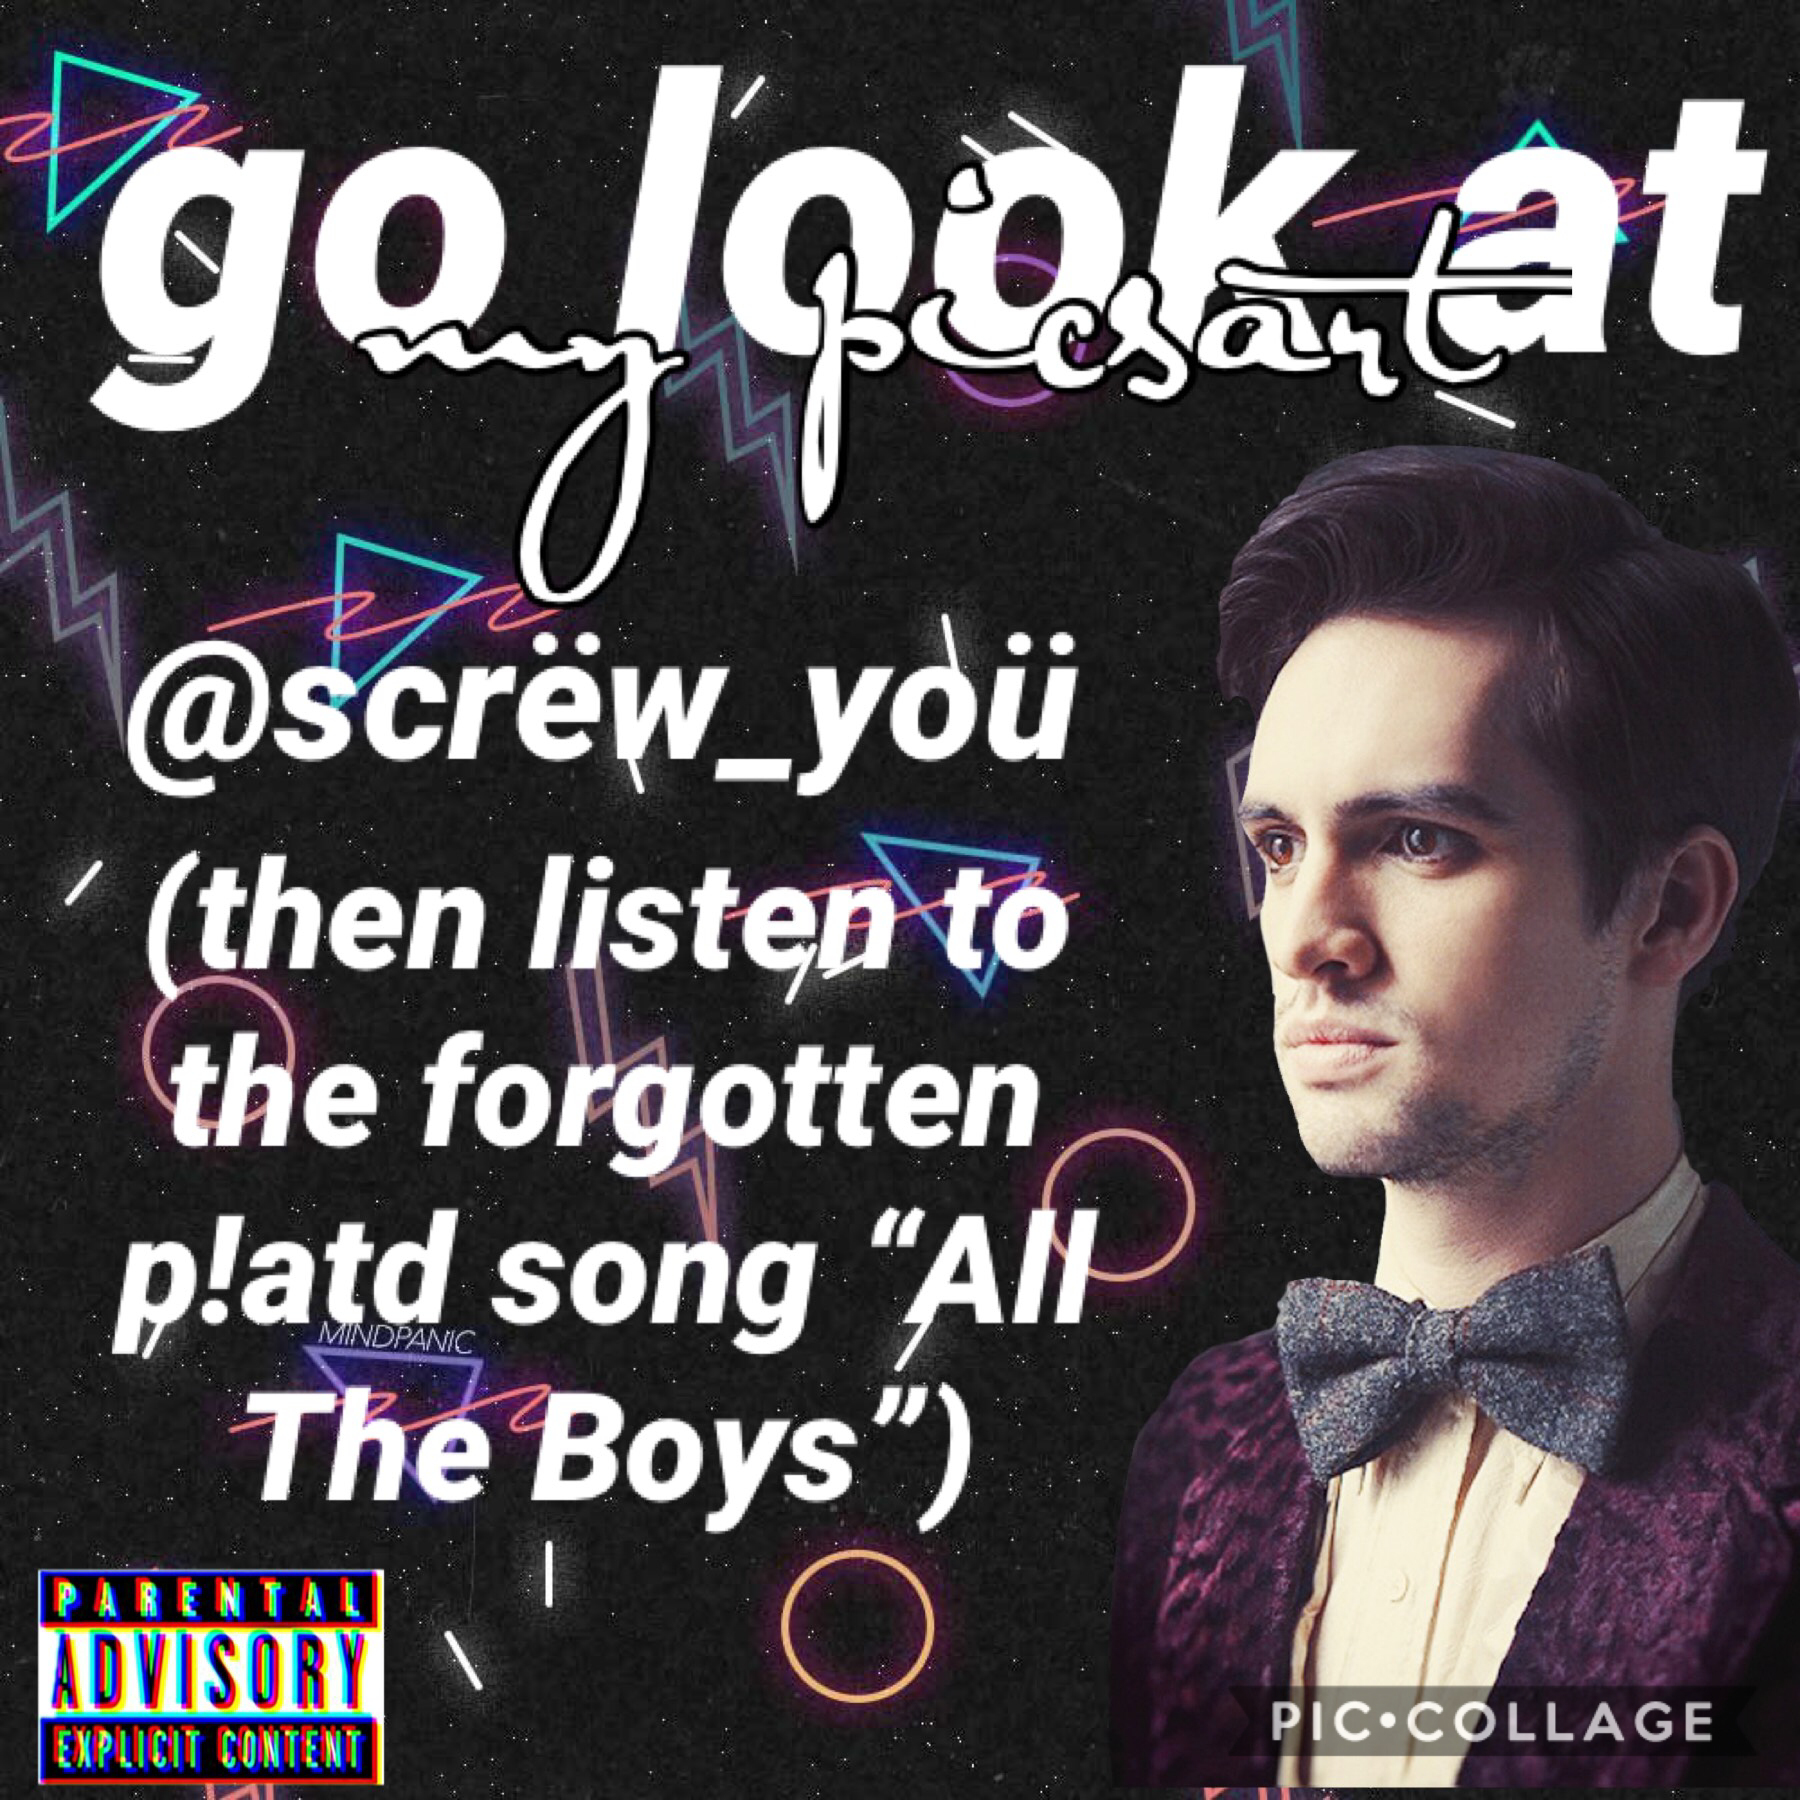 TAP
follow my PA !!
all the boys is totally underrated, listen to it n o w!!